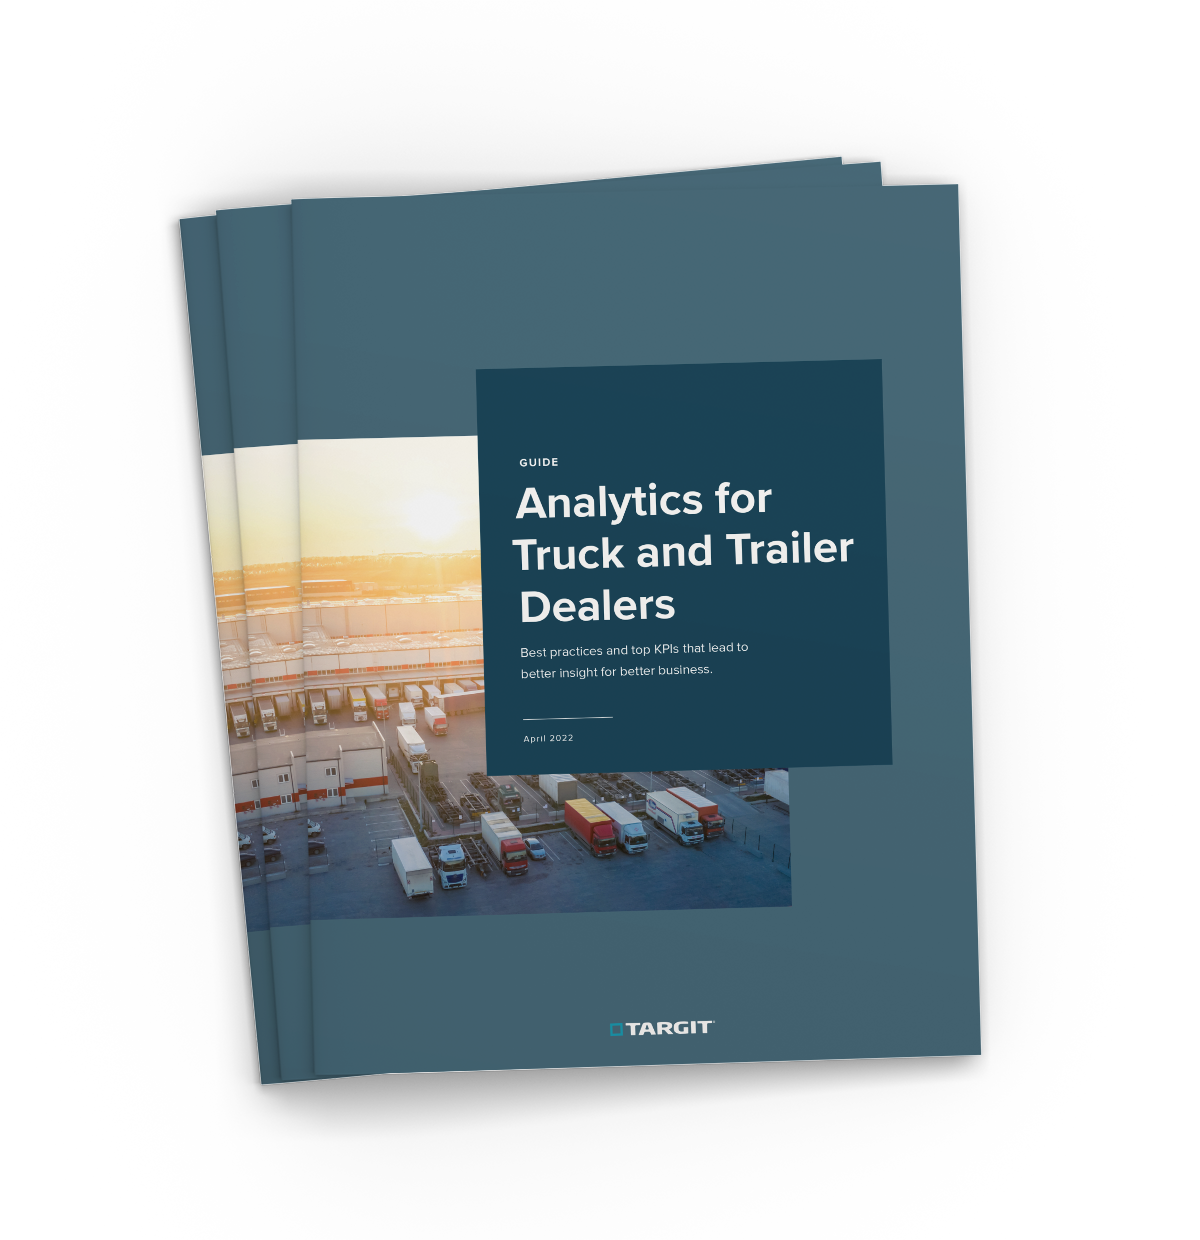 Analytics for Truck and Trailer Dealers